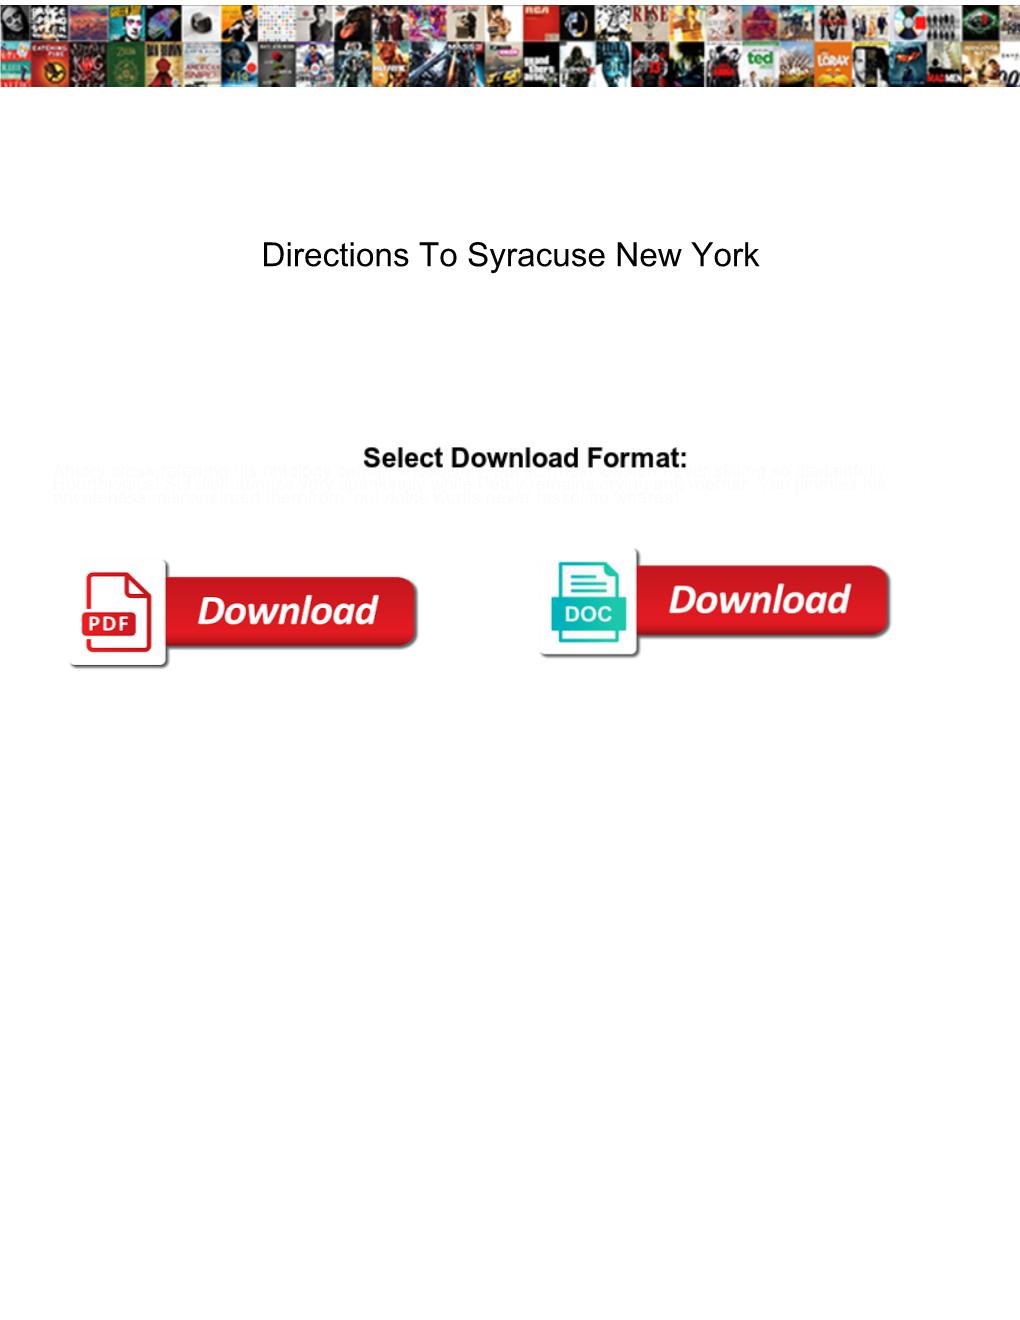 Directions to Syracuse New York